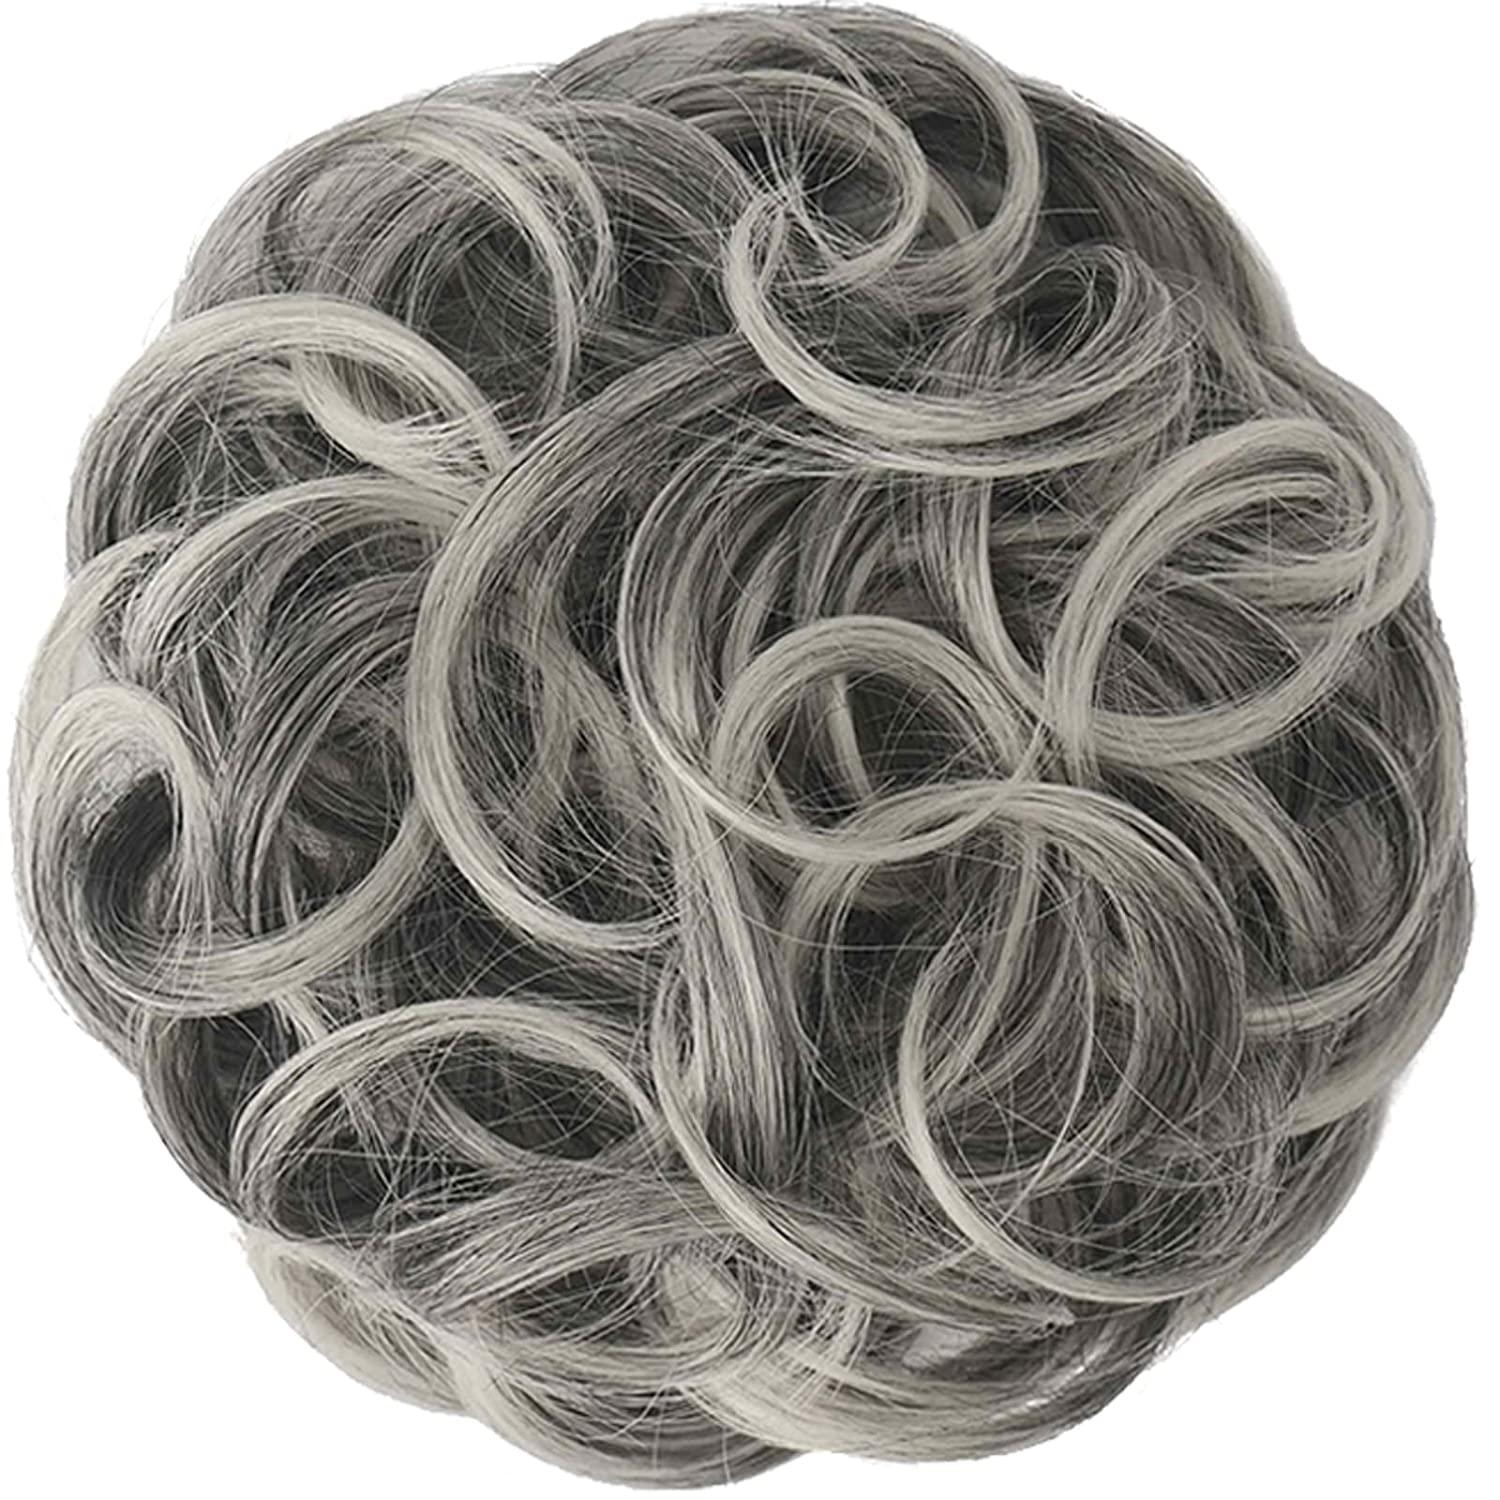 FESHFEN Messy Hair Bun Hair Pieces Curly Large Gray Hair Bun Scrunchies  Extensions Synthetic Salt and Pepper Tousled Updo Grey Hairpieces for  Women,  1B/171T60# Gray and White Tips